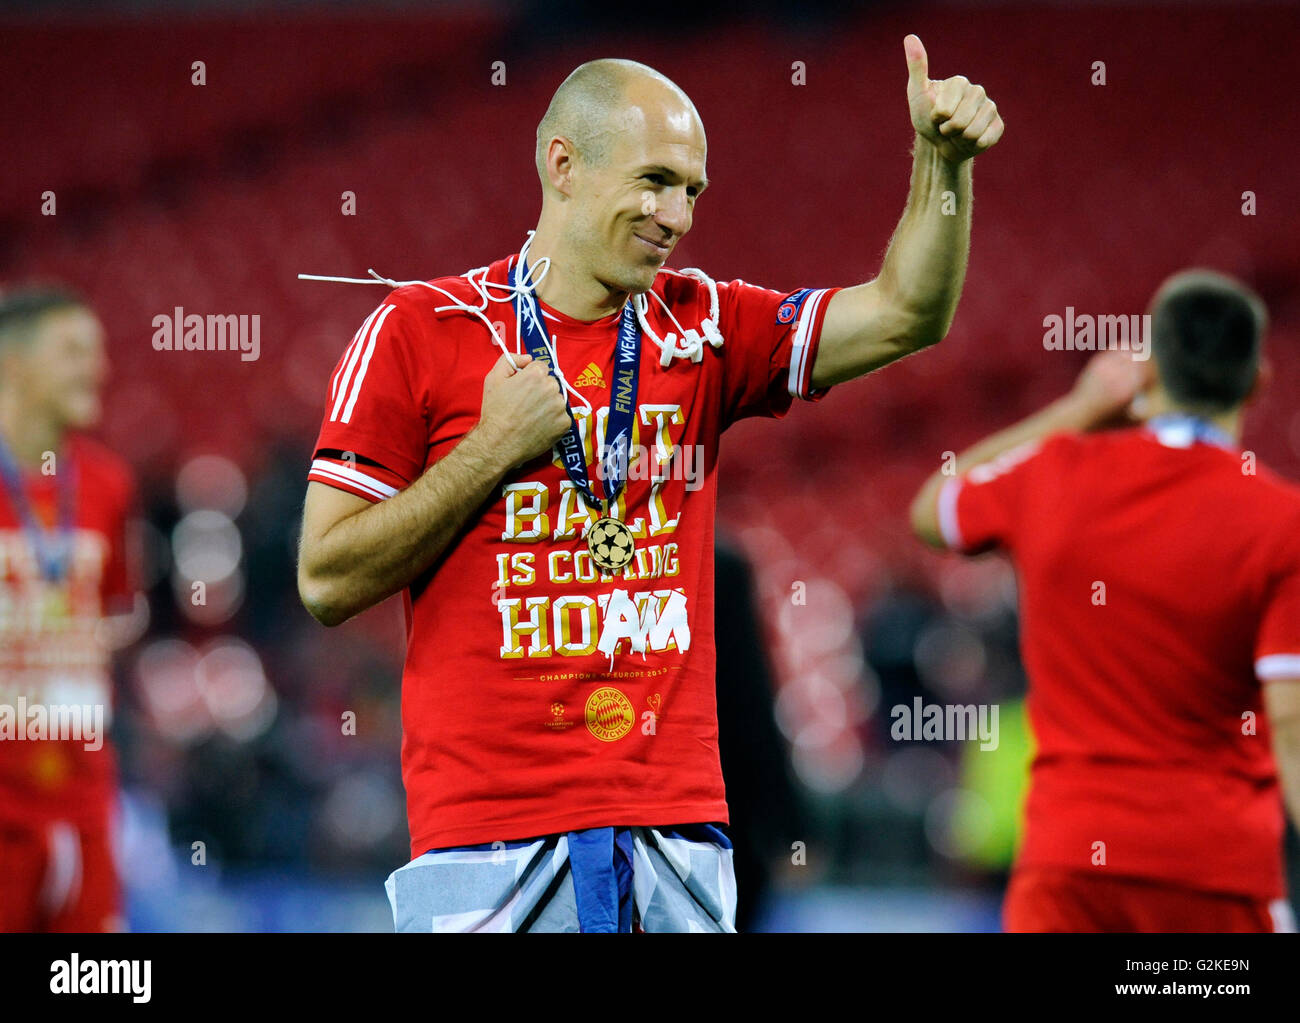 Arjen Robben making a thumbs-up gesture at the end of the game, UEFA Champions League Final 2013, Borussia Dortmund - FC Bayern Stock Photo